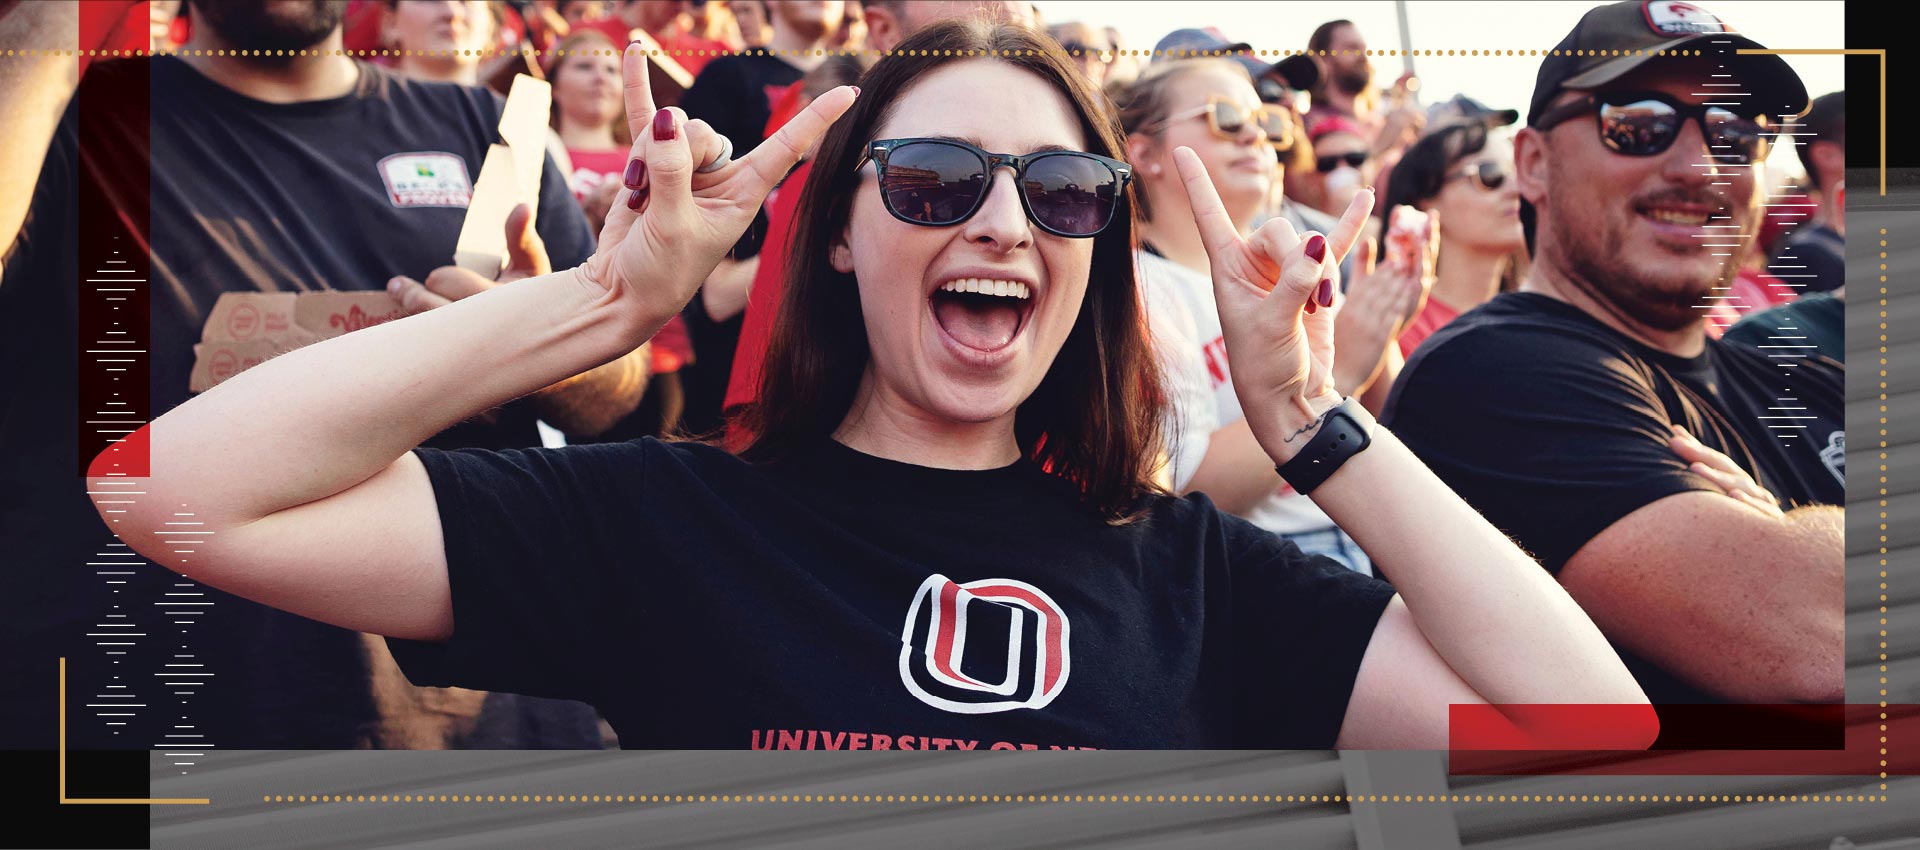 Uno student at event holding both hands up in "Maverick" symbol